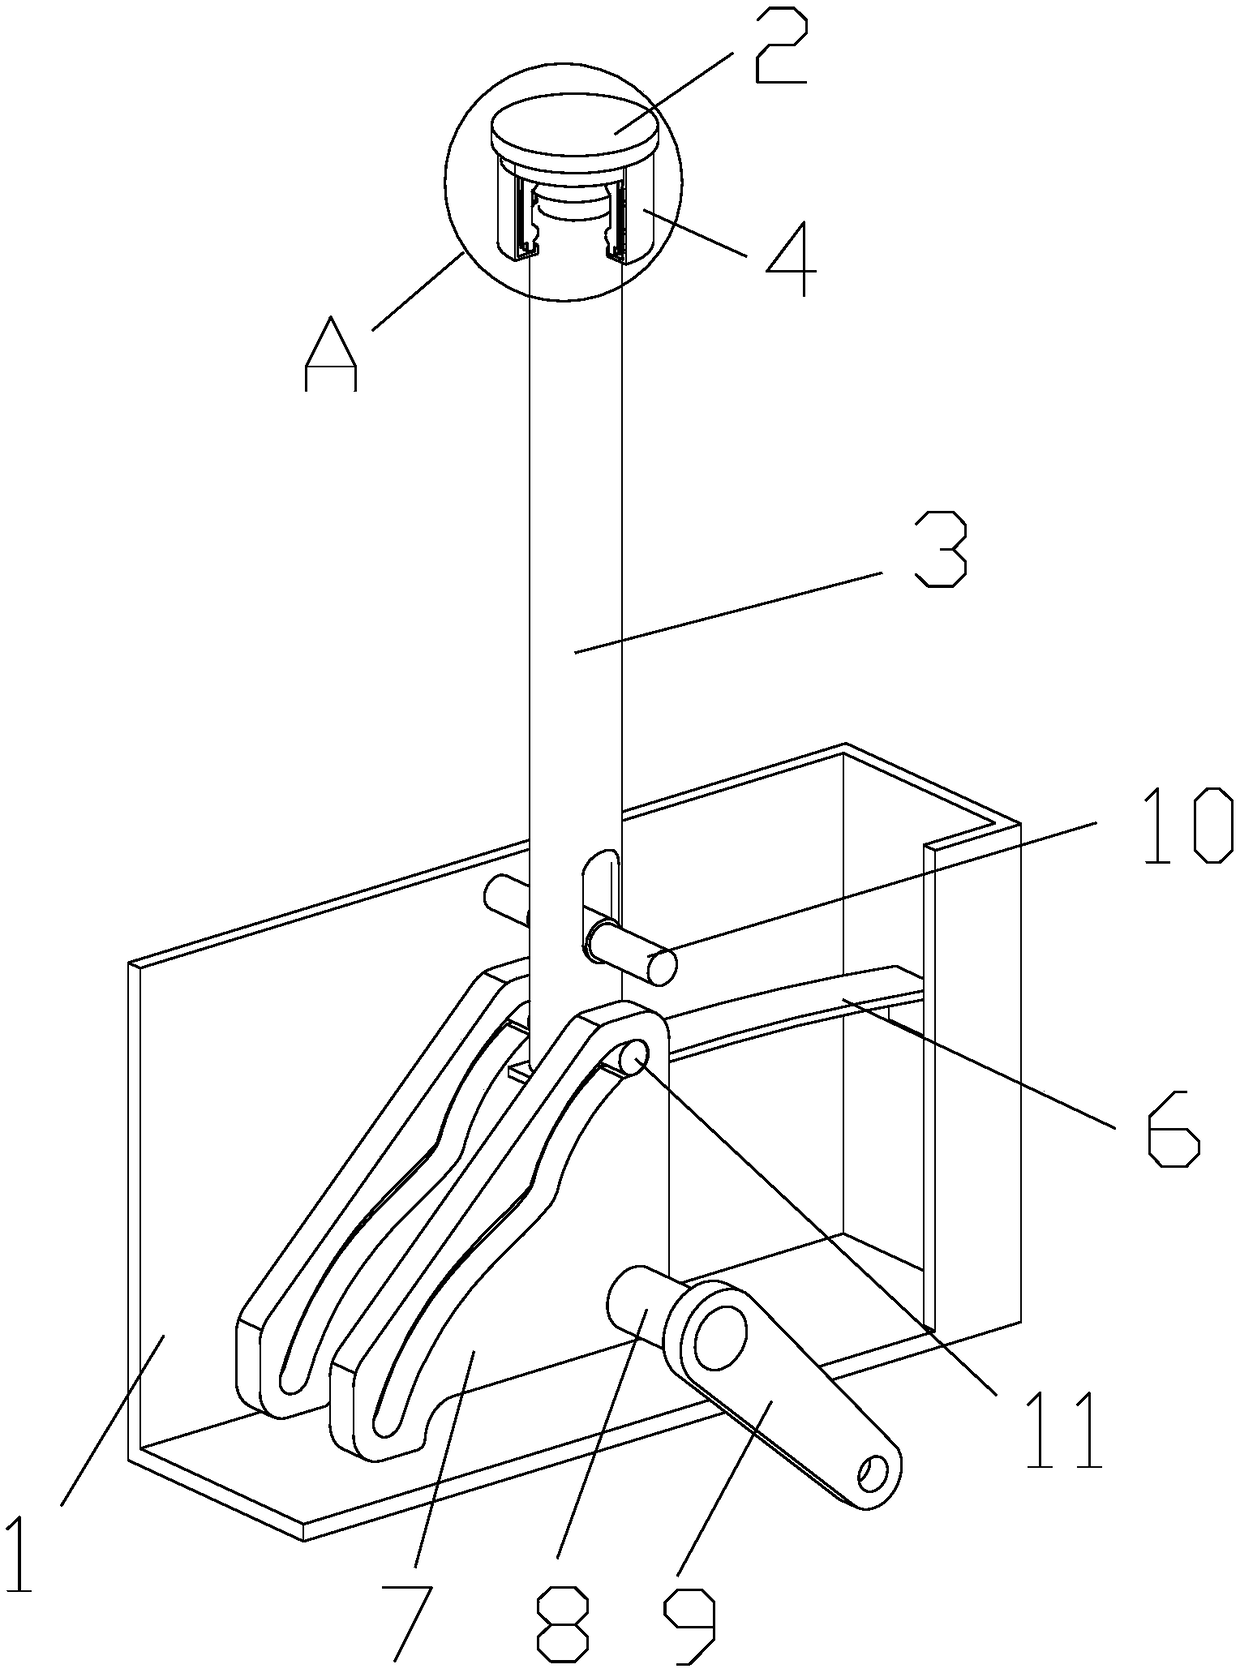 Large-current grounding device